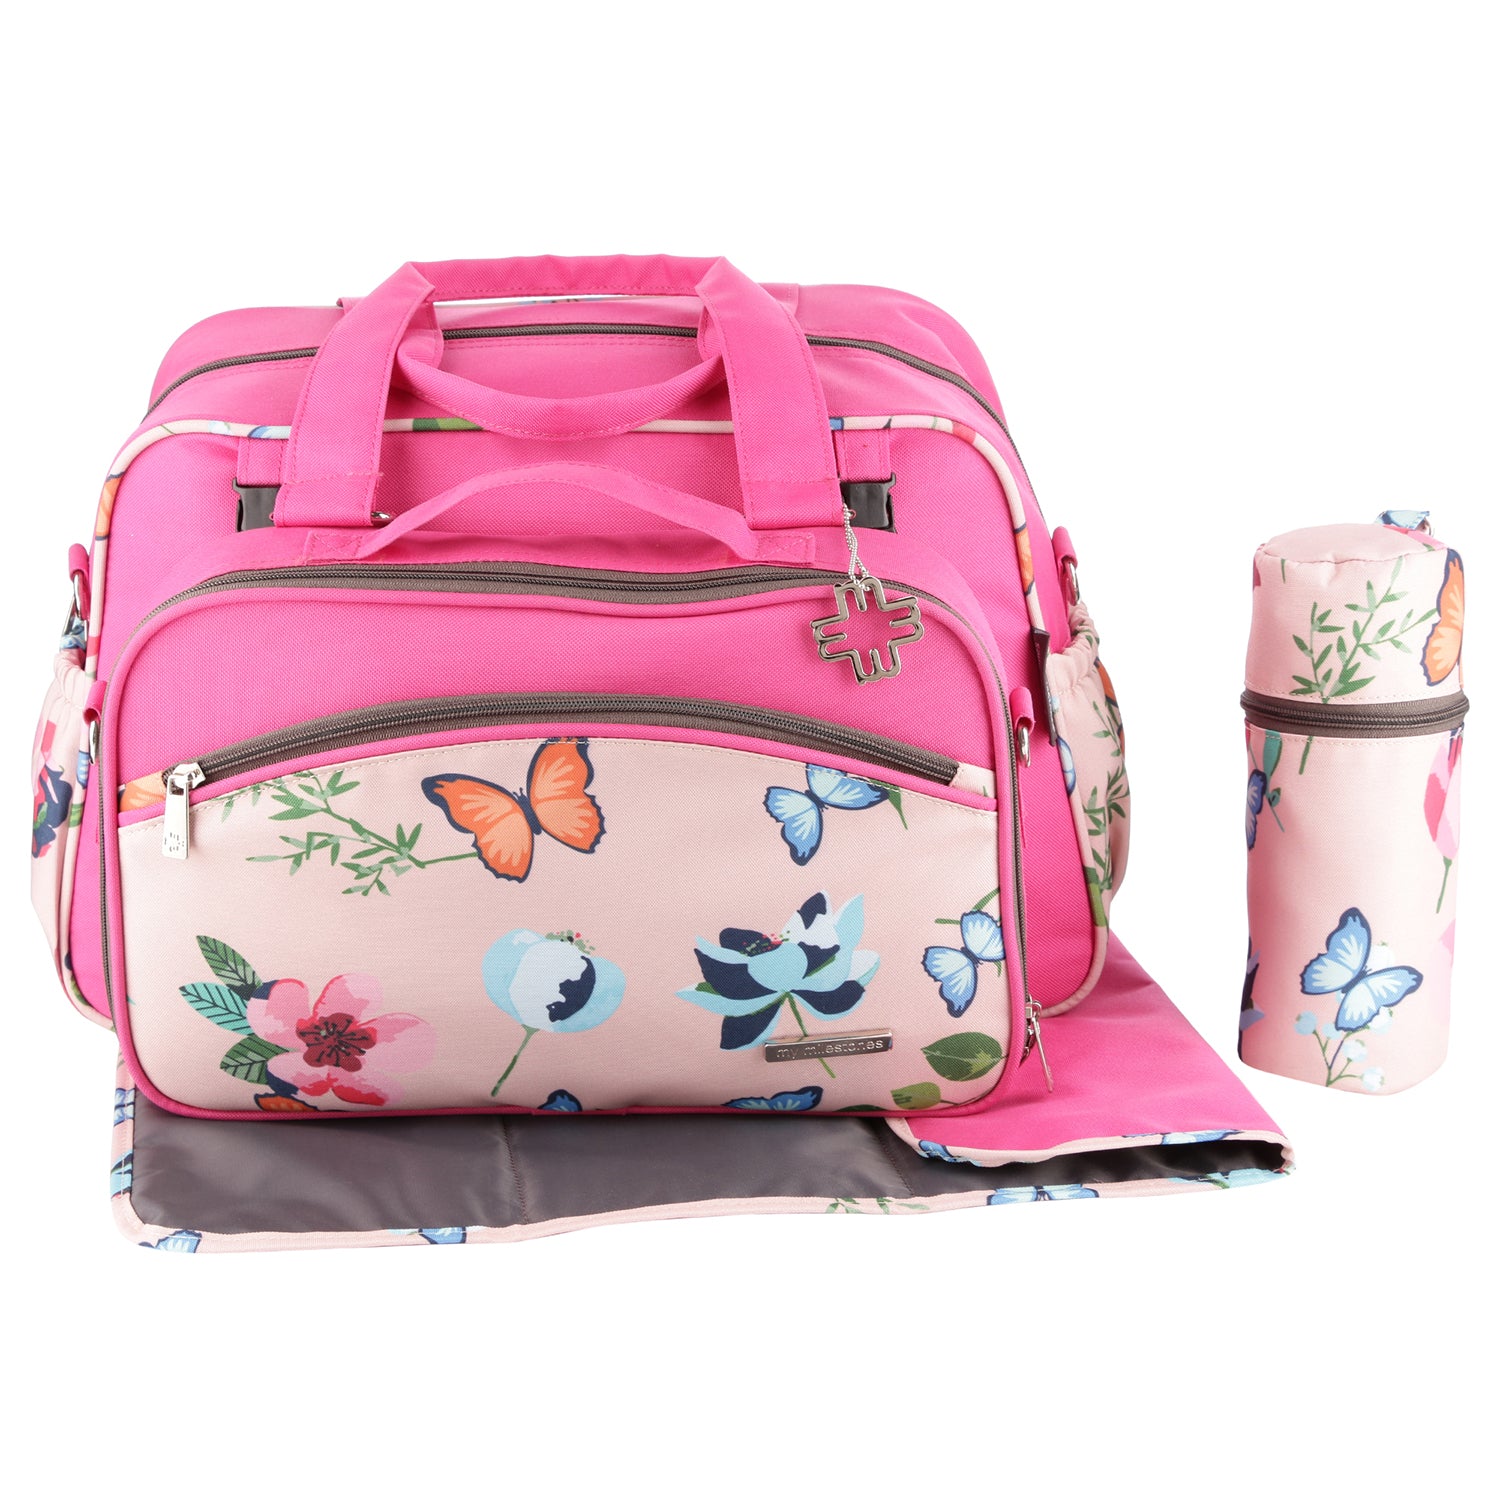 Duo Detach 2-In-1 Baby Diaper Bag - Pink Blossom